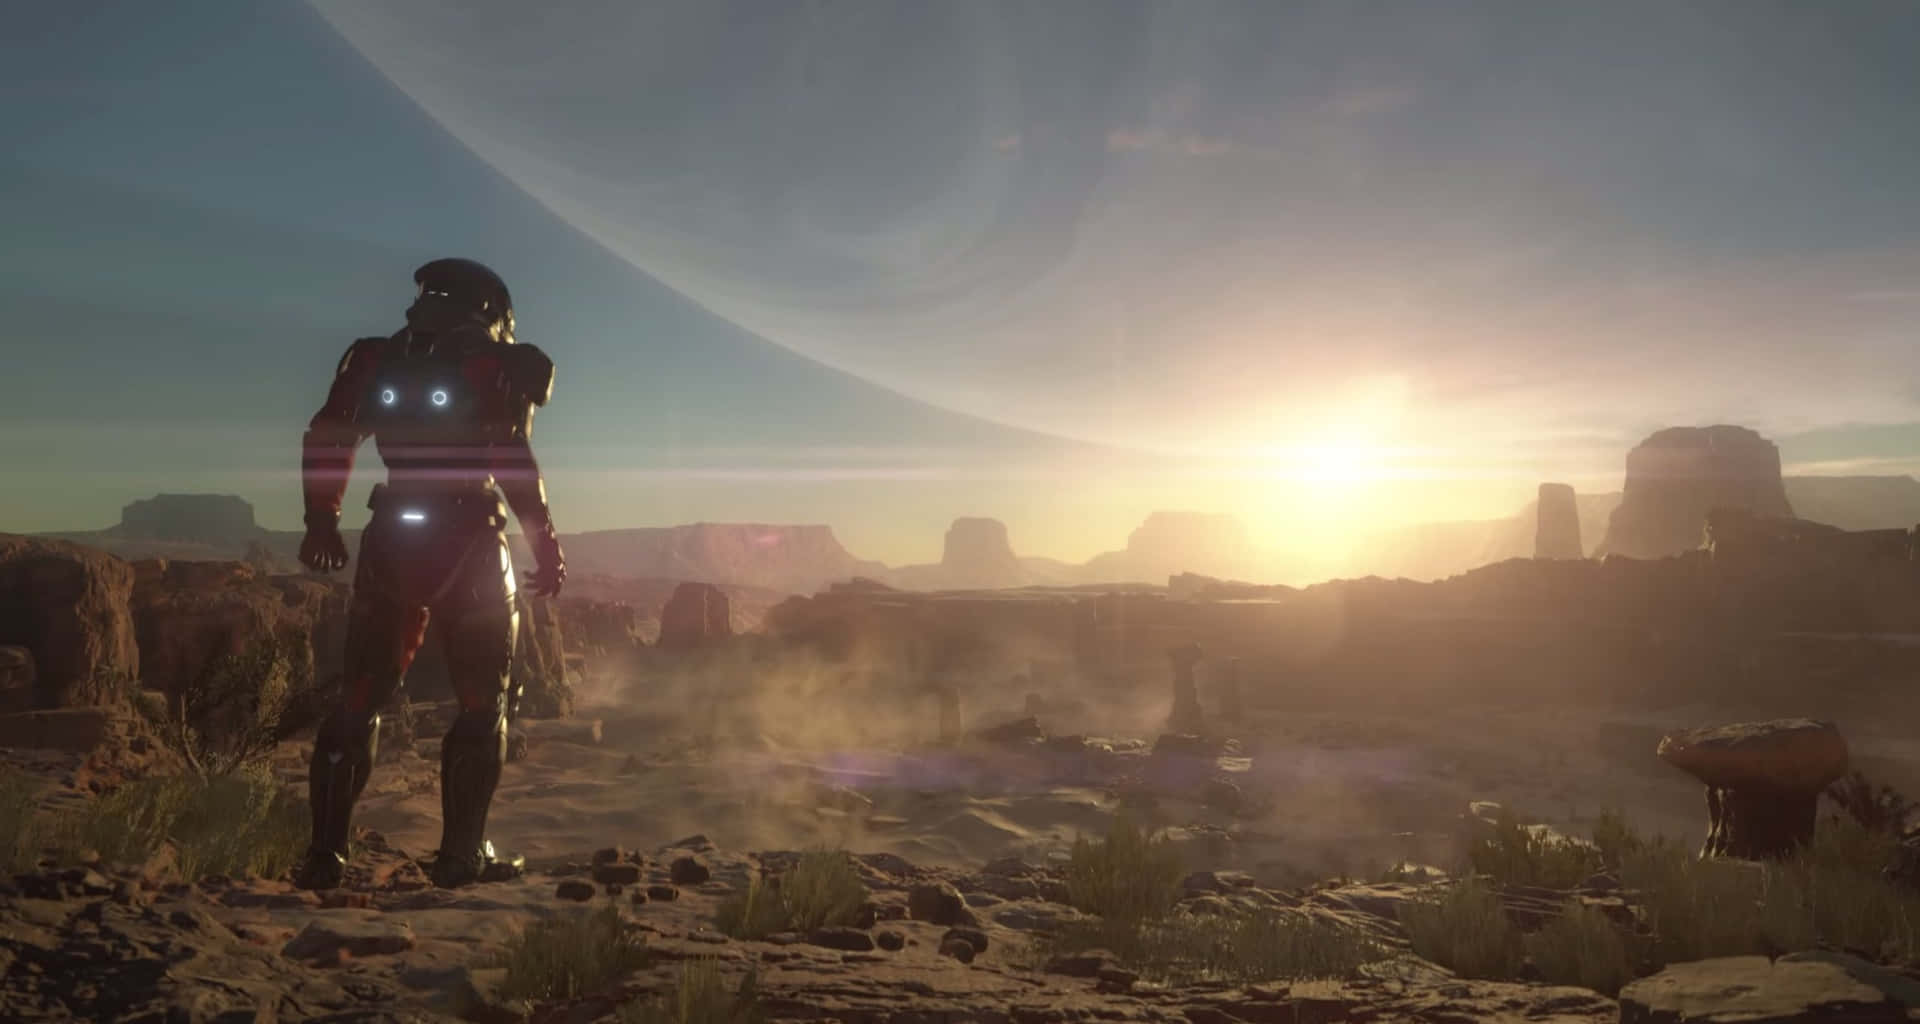 The Tempest crew explores a mysterious planet in Mass Effect: Andromeda Wallpaper